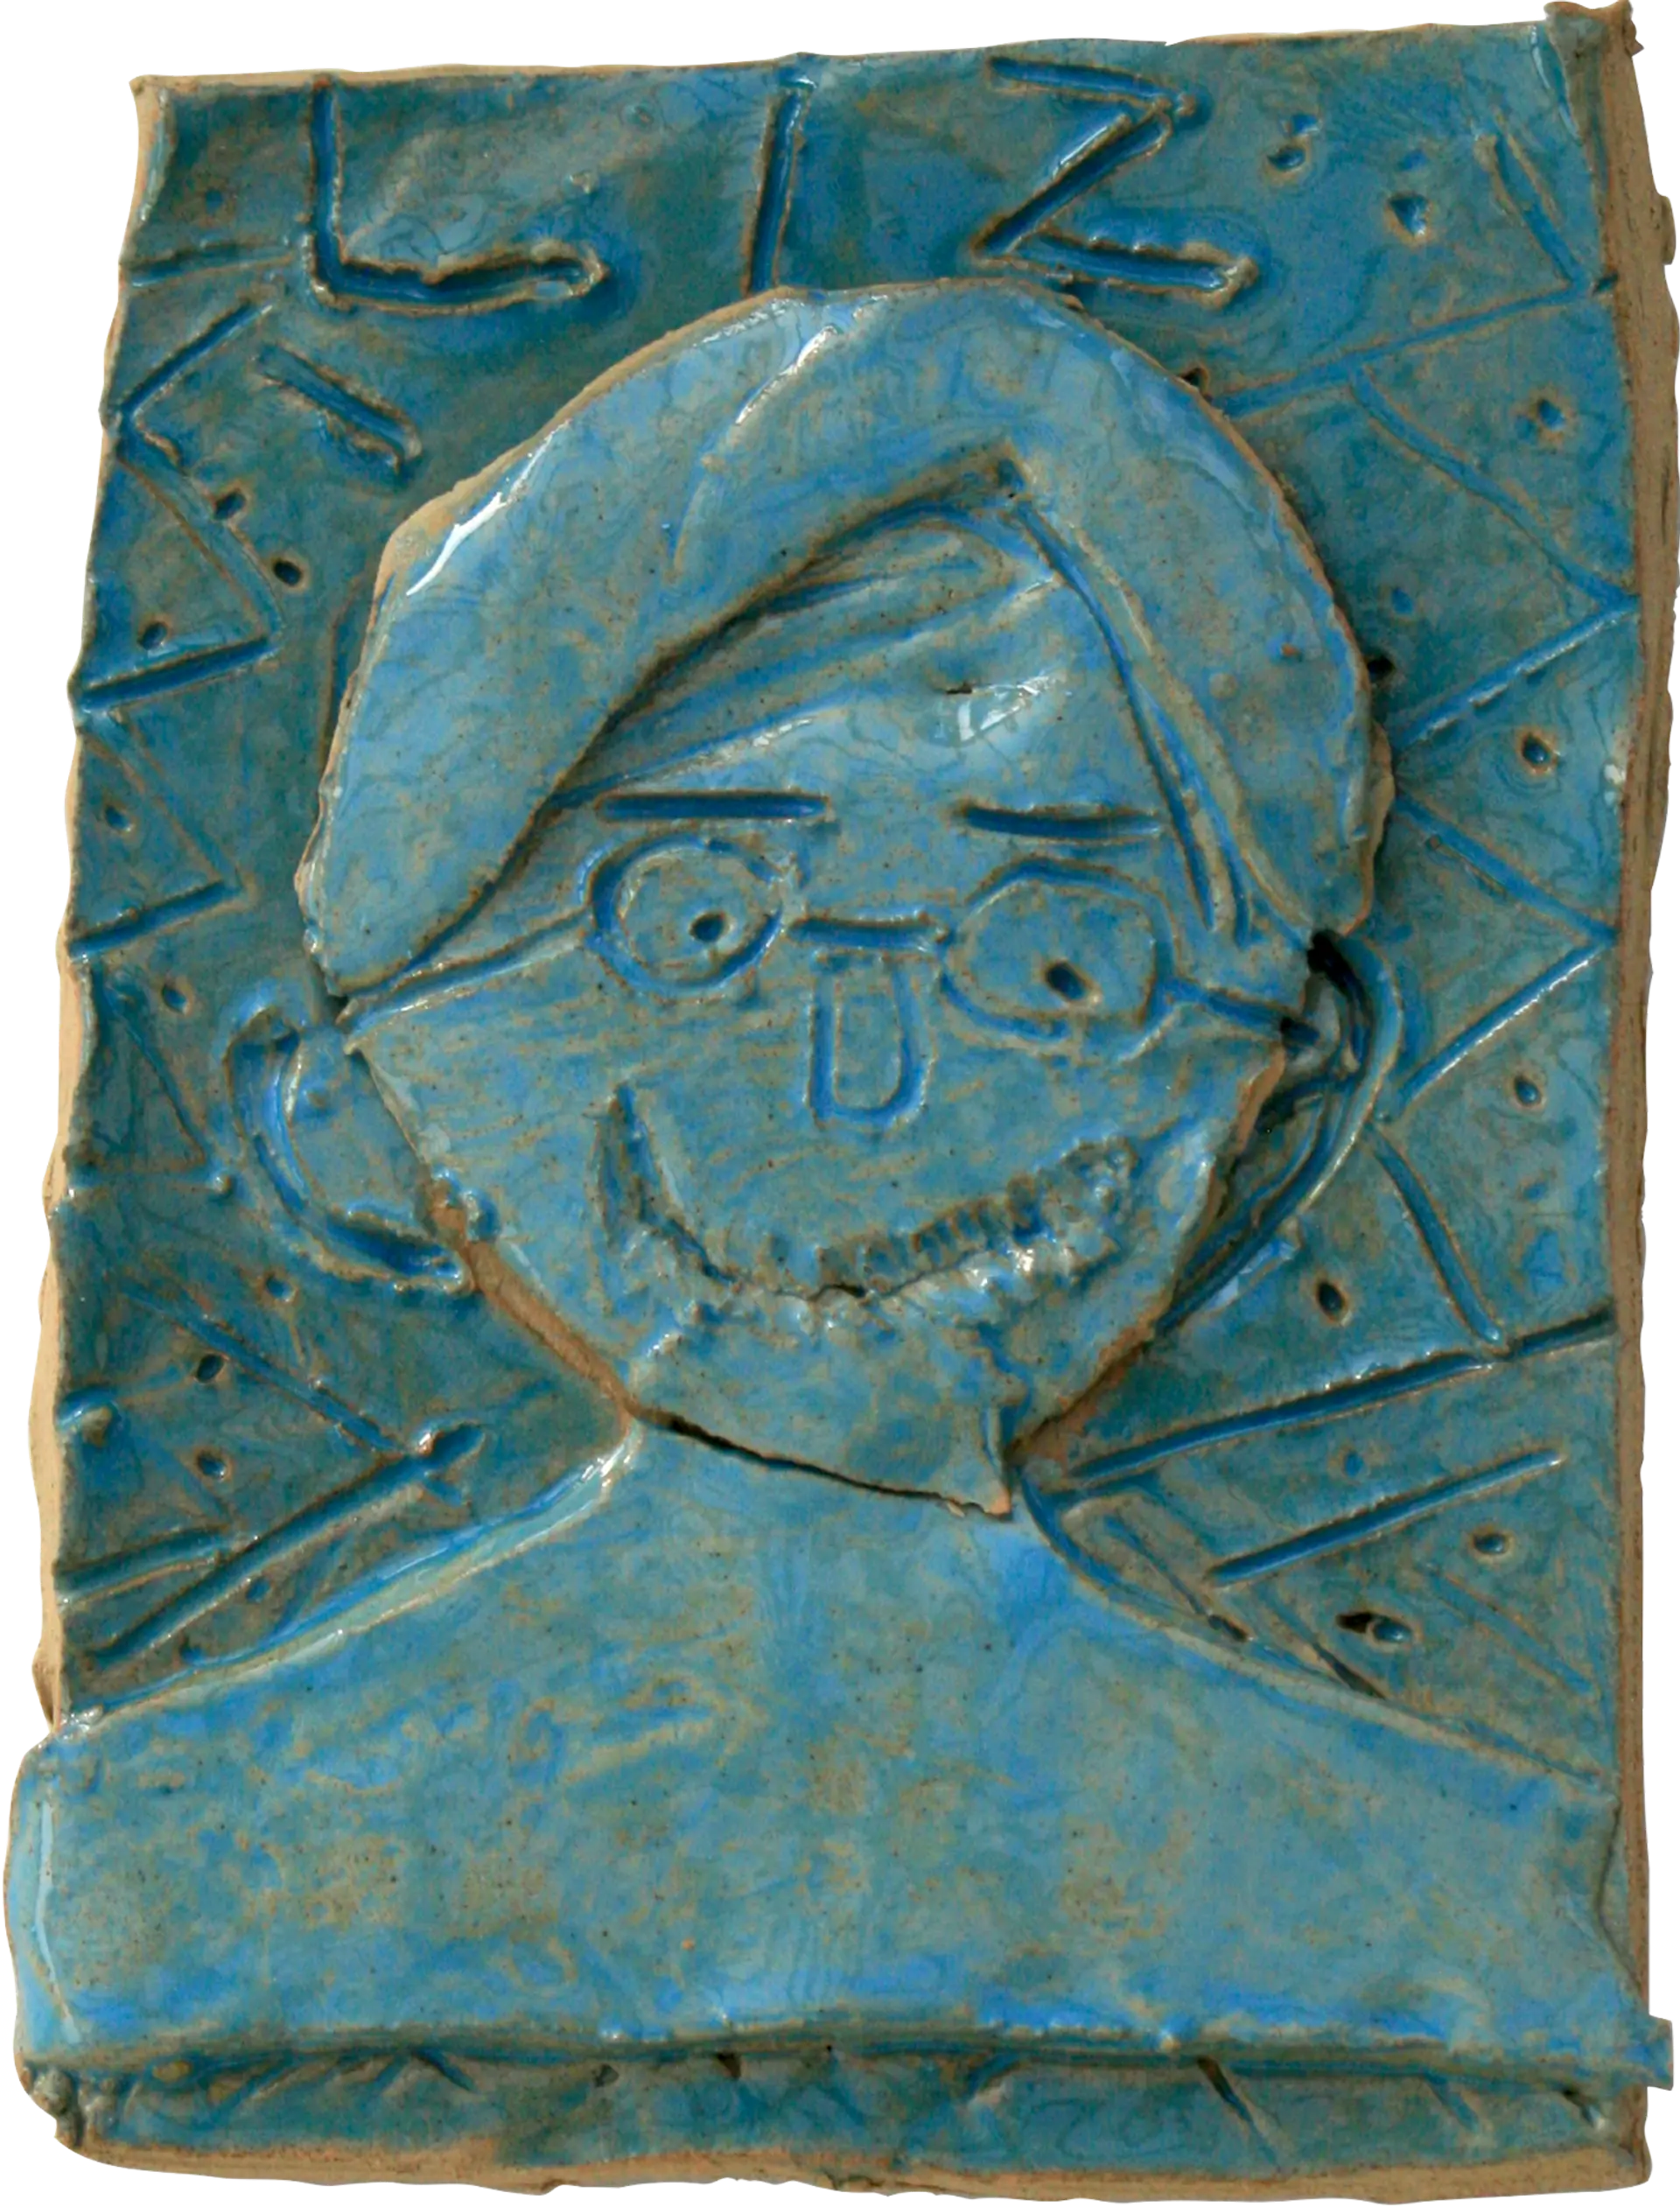 A blue glazed ceramic tile of Liz, Maria’s mum. She is wearing glasses and is smiling. The background is decorated with jagged jazzy lines and dots. 